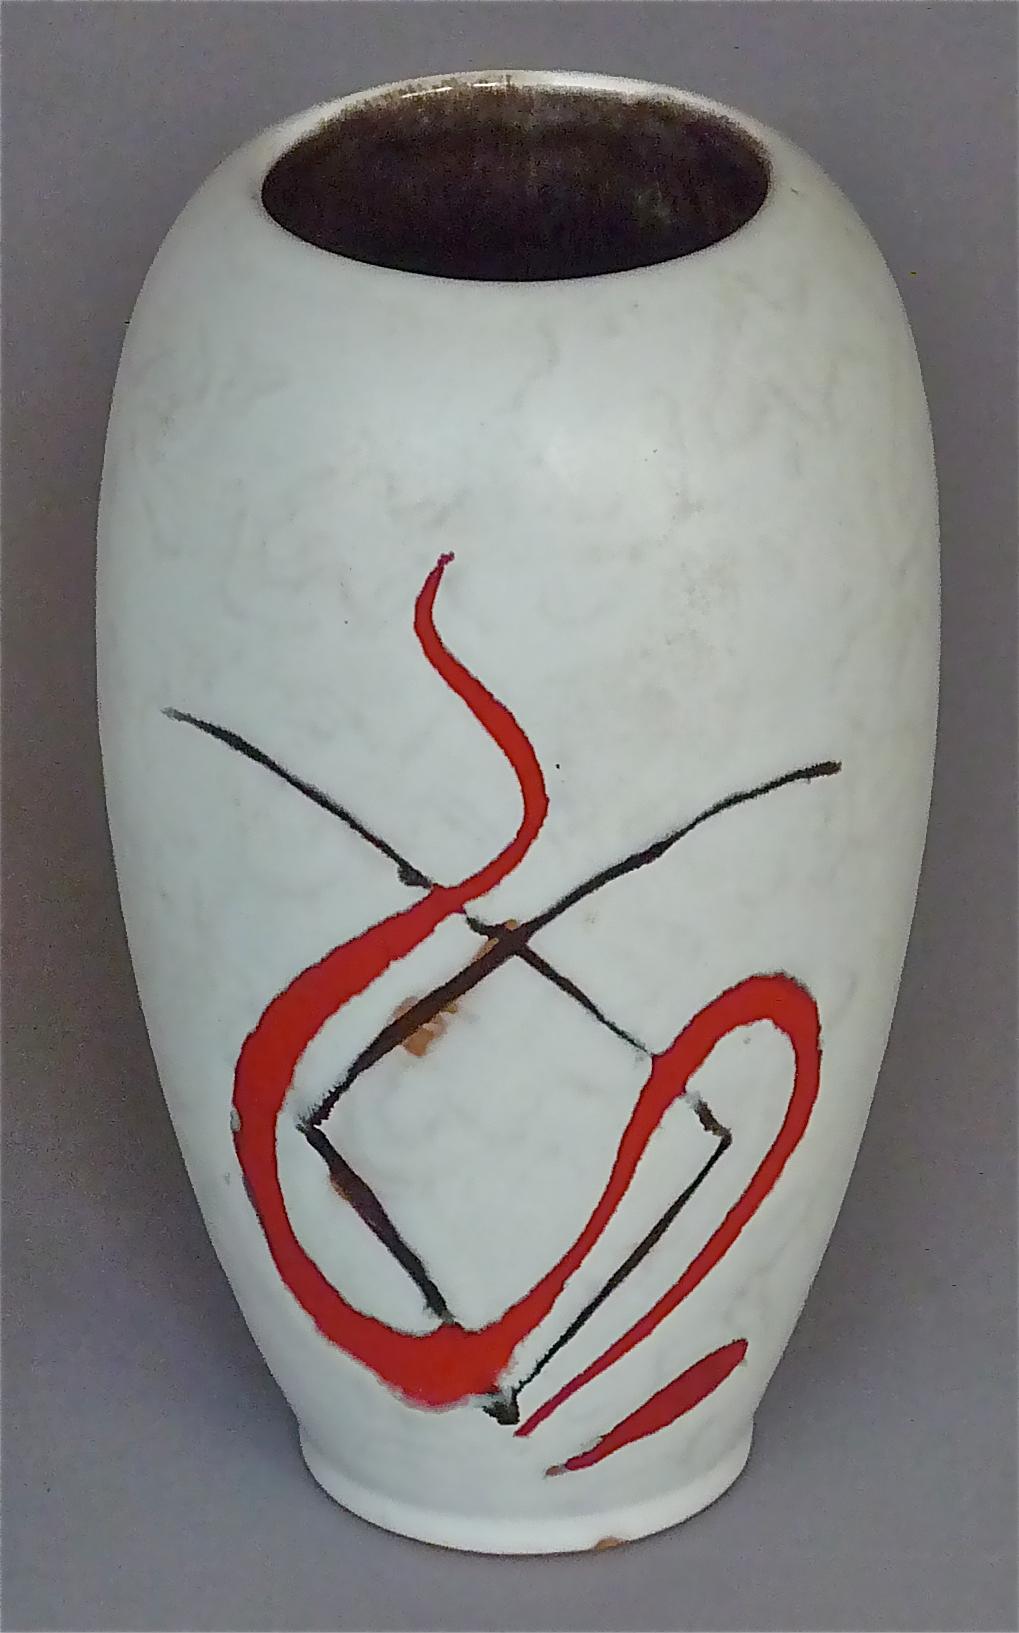 Mid-20th Century Abstract Midcentury Art Ceramic Vase and Bowl Gambone Miro Style White Red 1950s For Sale